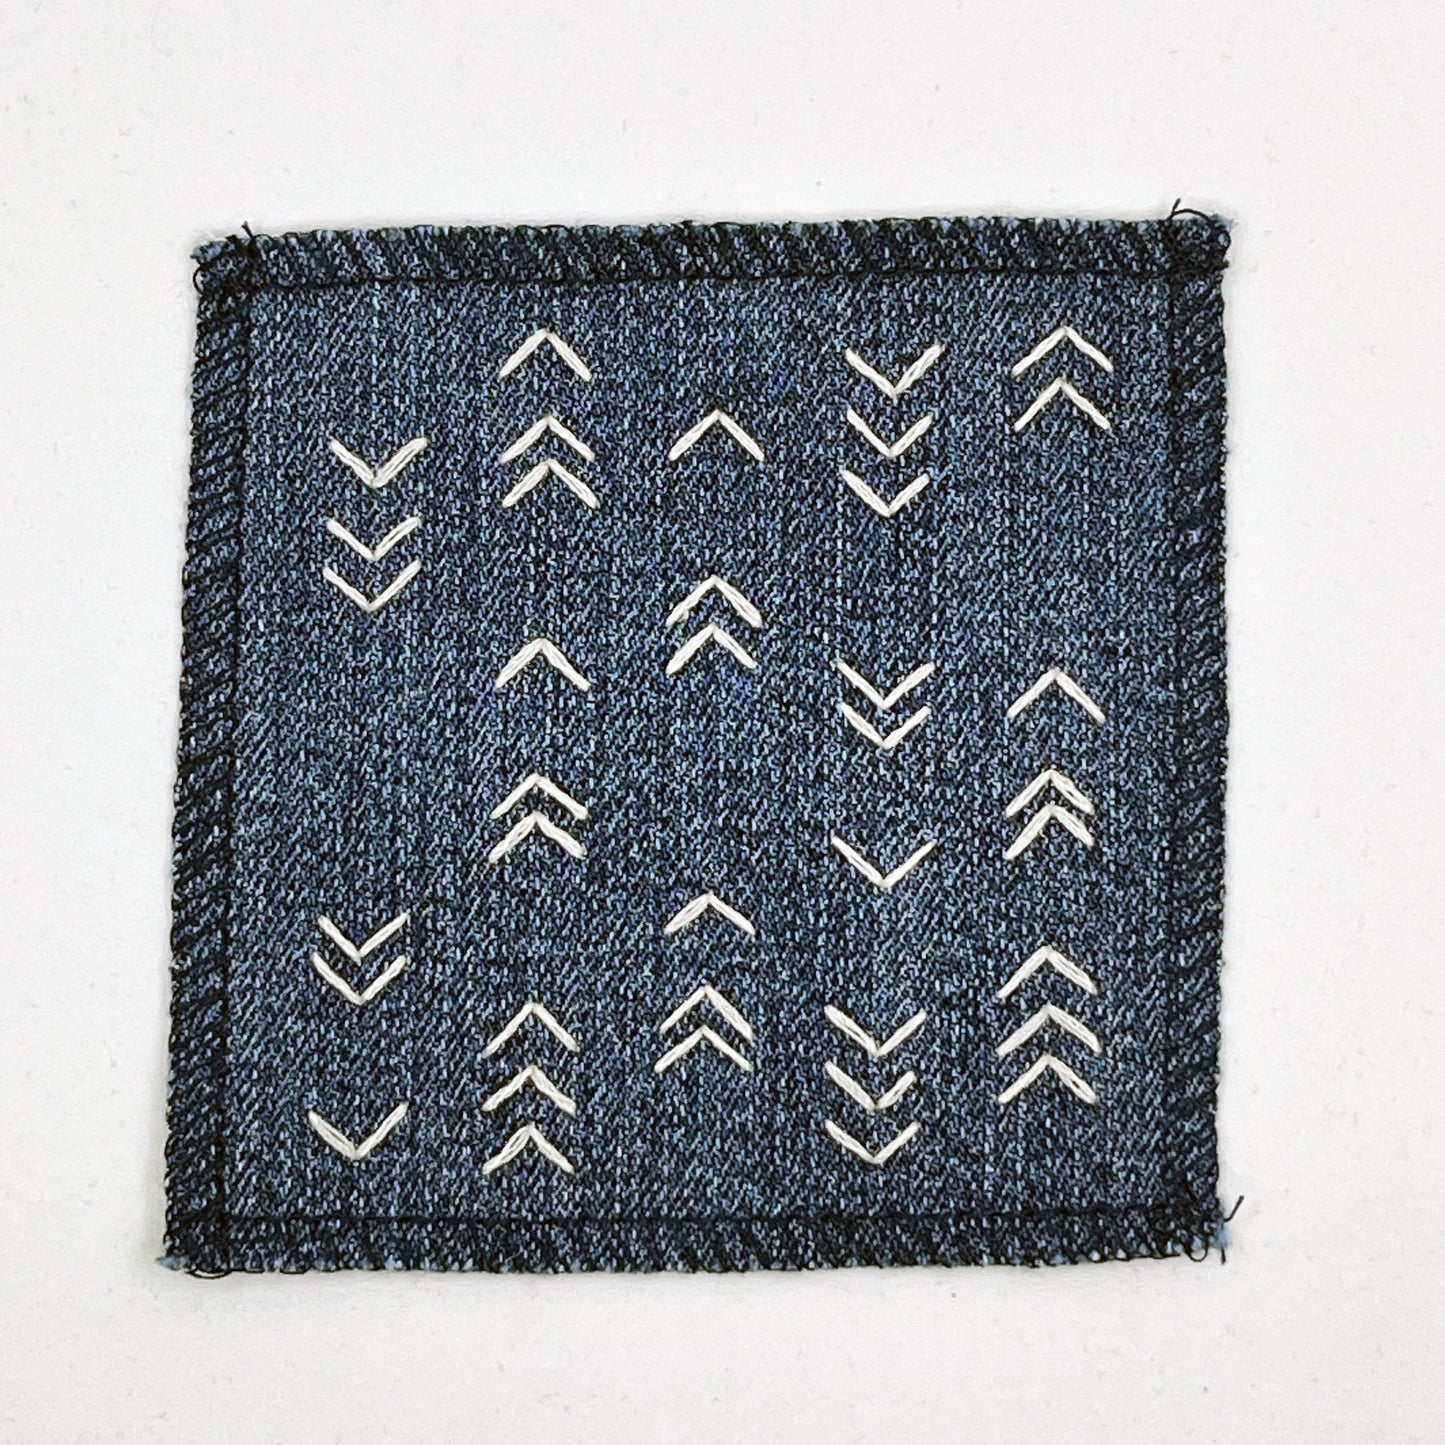  a square denim patch hand stitched in ivory with rows of unevenly spaced small chevrons facing different directions on a white background